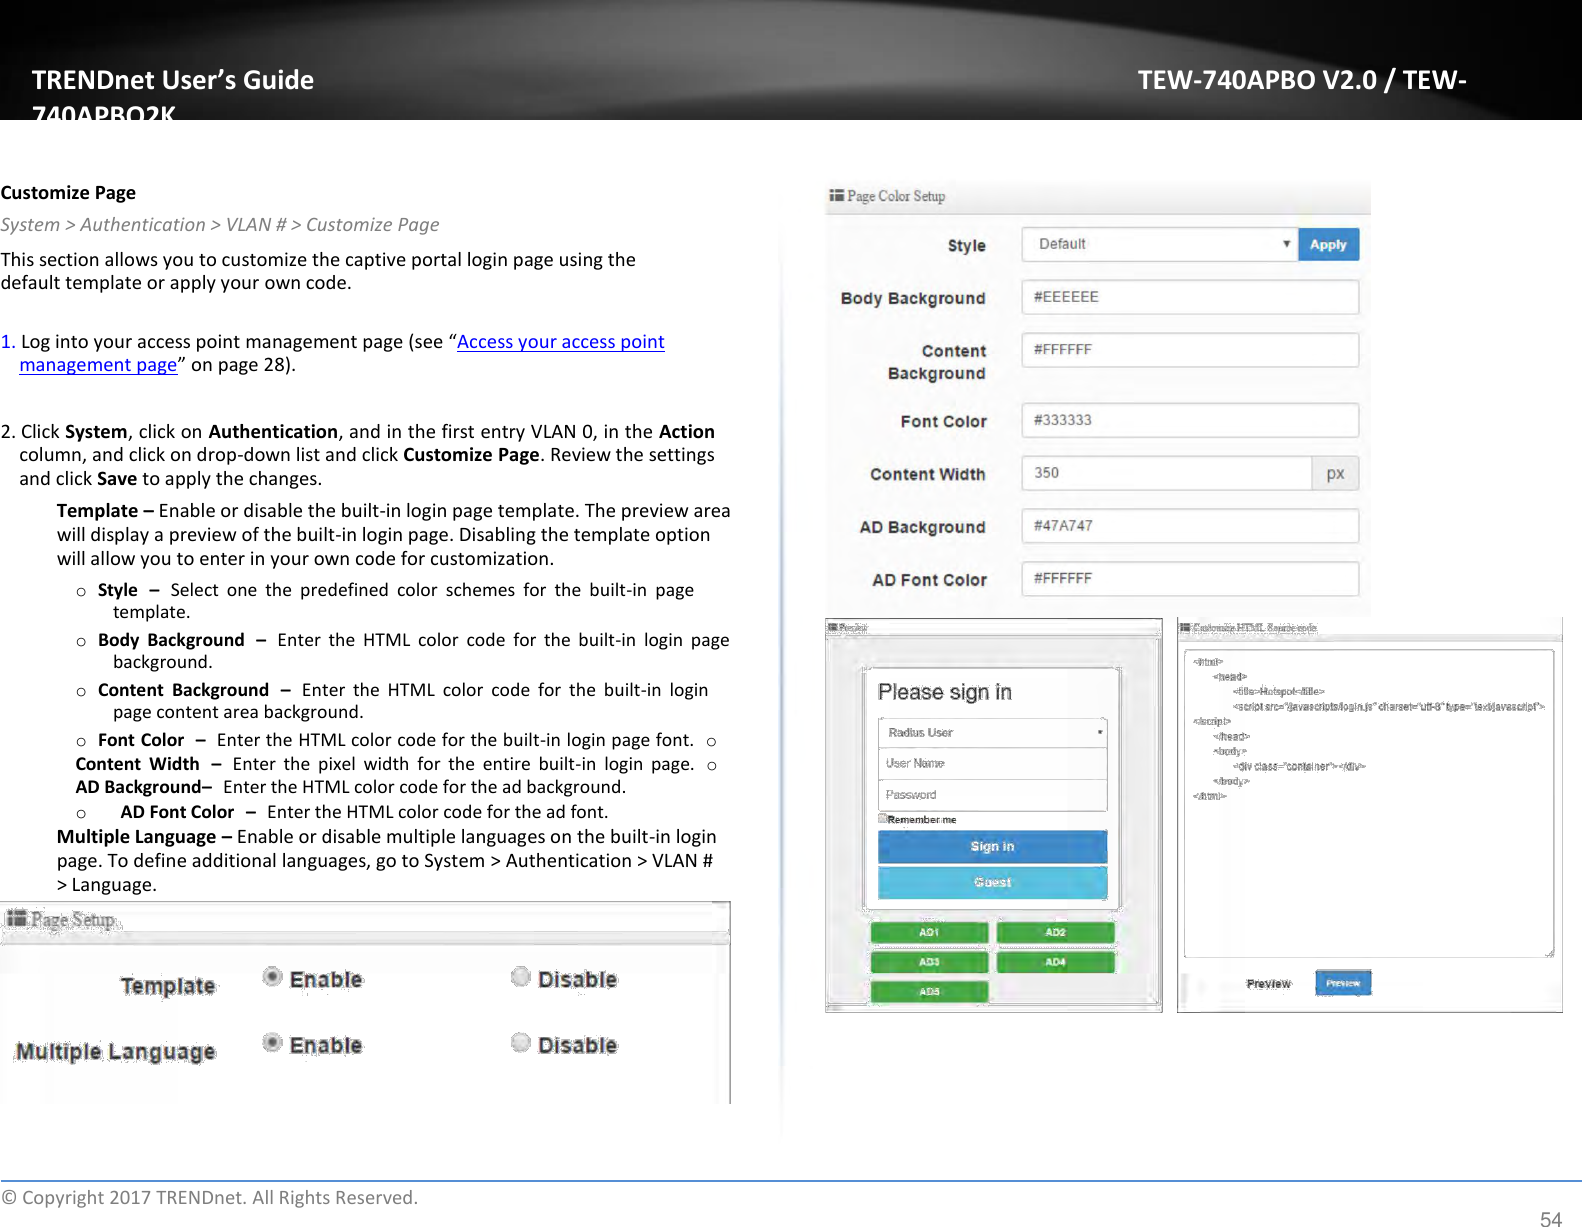 TRENDnet User’s Guide TEW-740APBO V2.0 / TEW-740APBO2K   Customize Page  System &gt; Authentication &gt; VLAN # &gt; Customize Page  This section allows you to customize the captive portal login page using the default template or apply your own code.  1. Log into your access point management page (see “Access your access point management page” on page 28).   2. Click System, click on Authentication, and in the first entry VLAN 0, in the Action column, and click on drop-down list and click Customize Page. Review the settings and click Save to apply the changes.  Template – Enable or disable the built-in login page template. The preview area will display a preview of the built-in login page. Disabling the template option will allow you to enter in your own code for customization.  o Style – Select  one  the  predefined  color  schemes  for  the  built-in  page template.  o Body  Background – Enter  the  HTML  color  code  for  the  built-in  login  page background.  o Content  Background – Enter  the  HTML  color  code  for  the  built-in  login page content area background.  o Font Color – Enter the HTML color code for the built-in login page font. o Content  Width – Enter  the  pixel  width  for  the  entire  built-in  login  page. o AD Background– Enter the HTML color code for the ad background.  o   AD Font Color – Enter the HTML color code for the ad font.  Multiple Language – Enable or disable multiple languages on the built-in login page. To define additional languages, go to System &gt; Authentication &gt; VLAN # &gt; Language.              ©  Copyright 2017 TRENDnet. All Rights Reserved. 54 